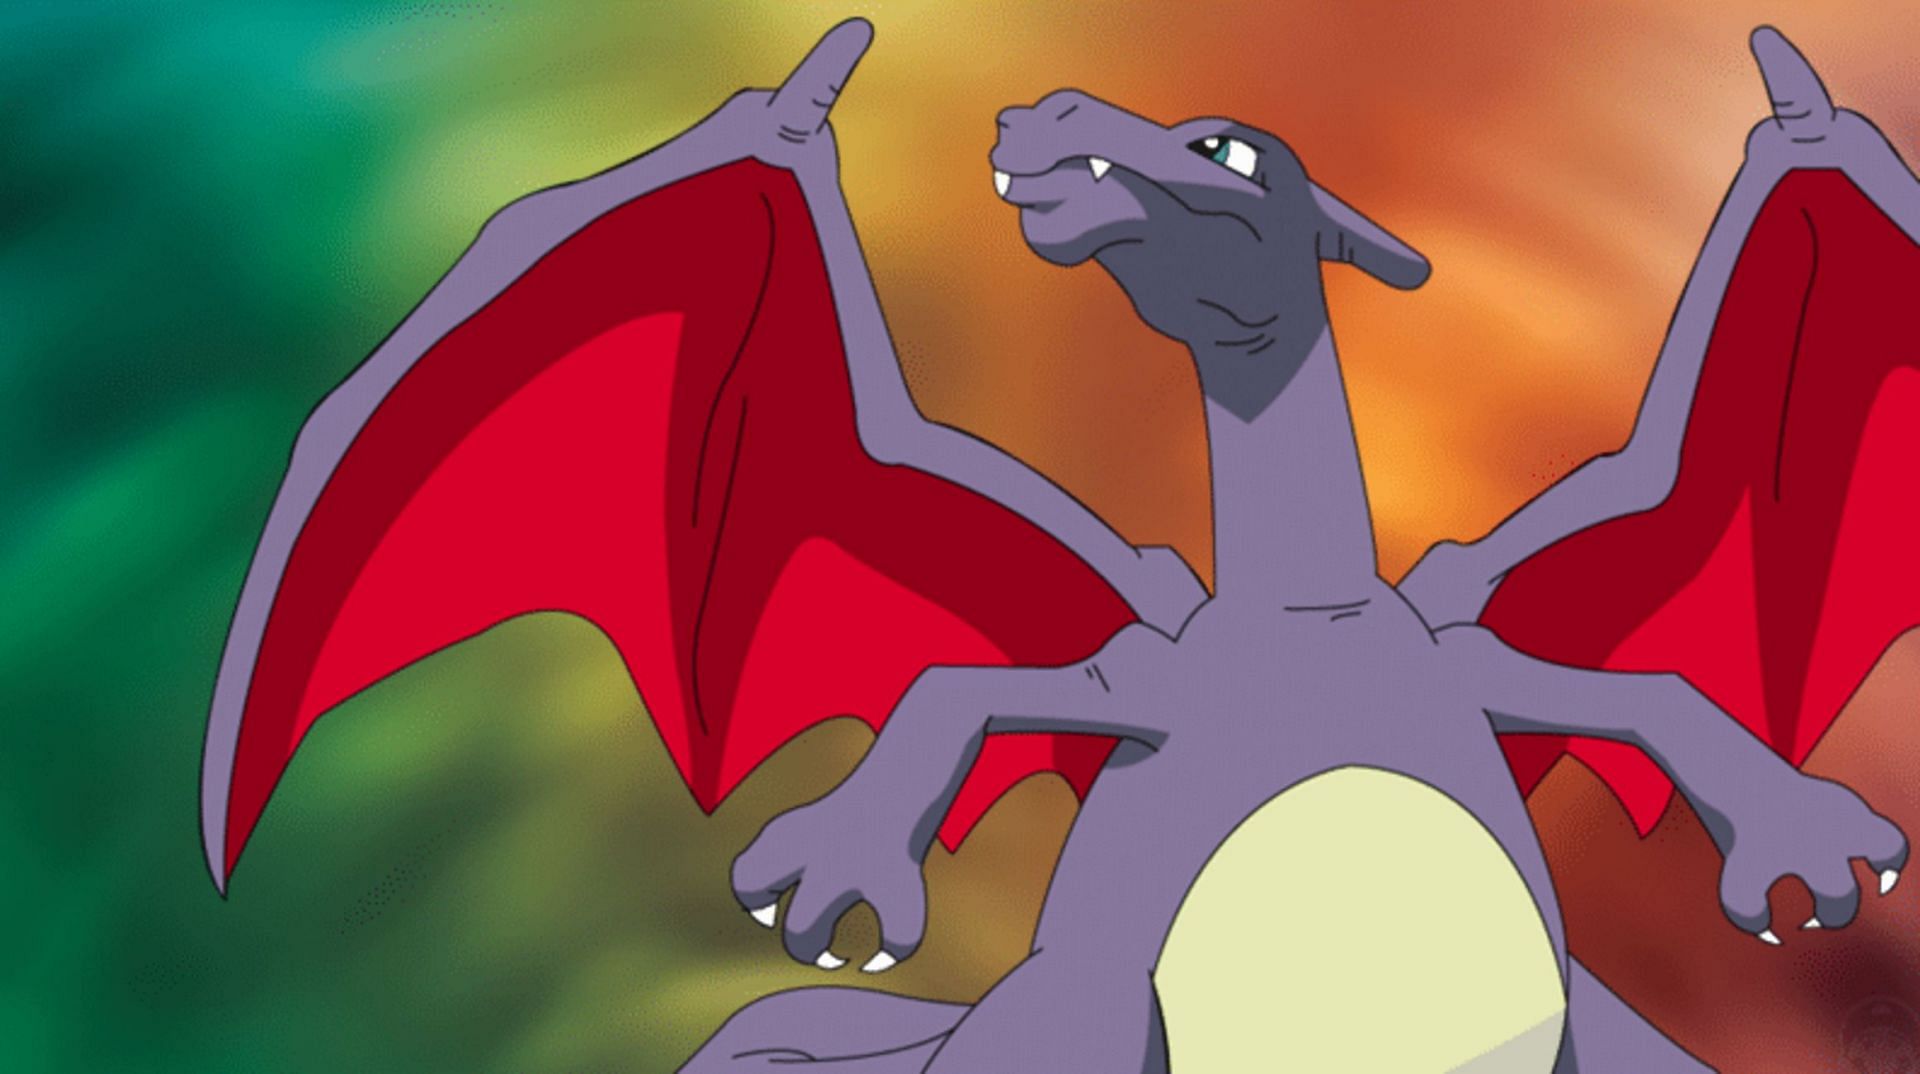 Pokemon players can grab a code for Shiny Charizard at GAME in